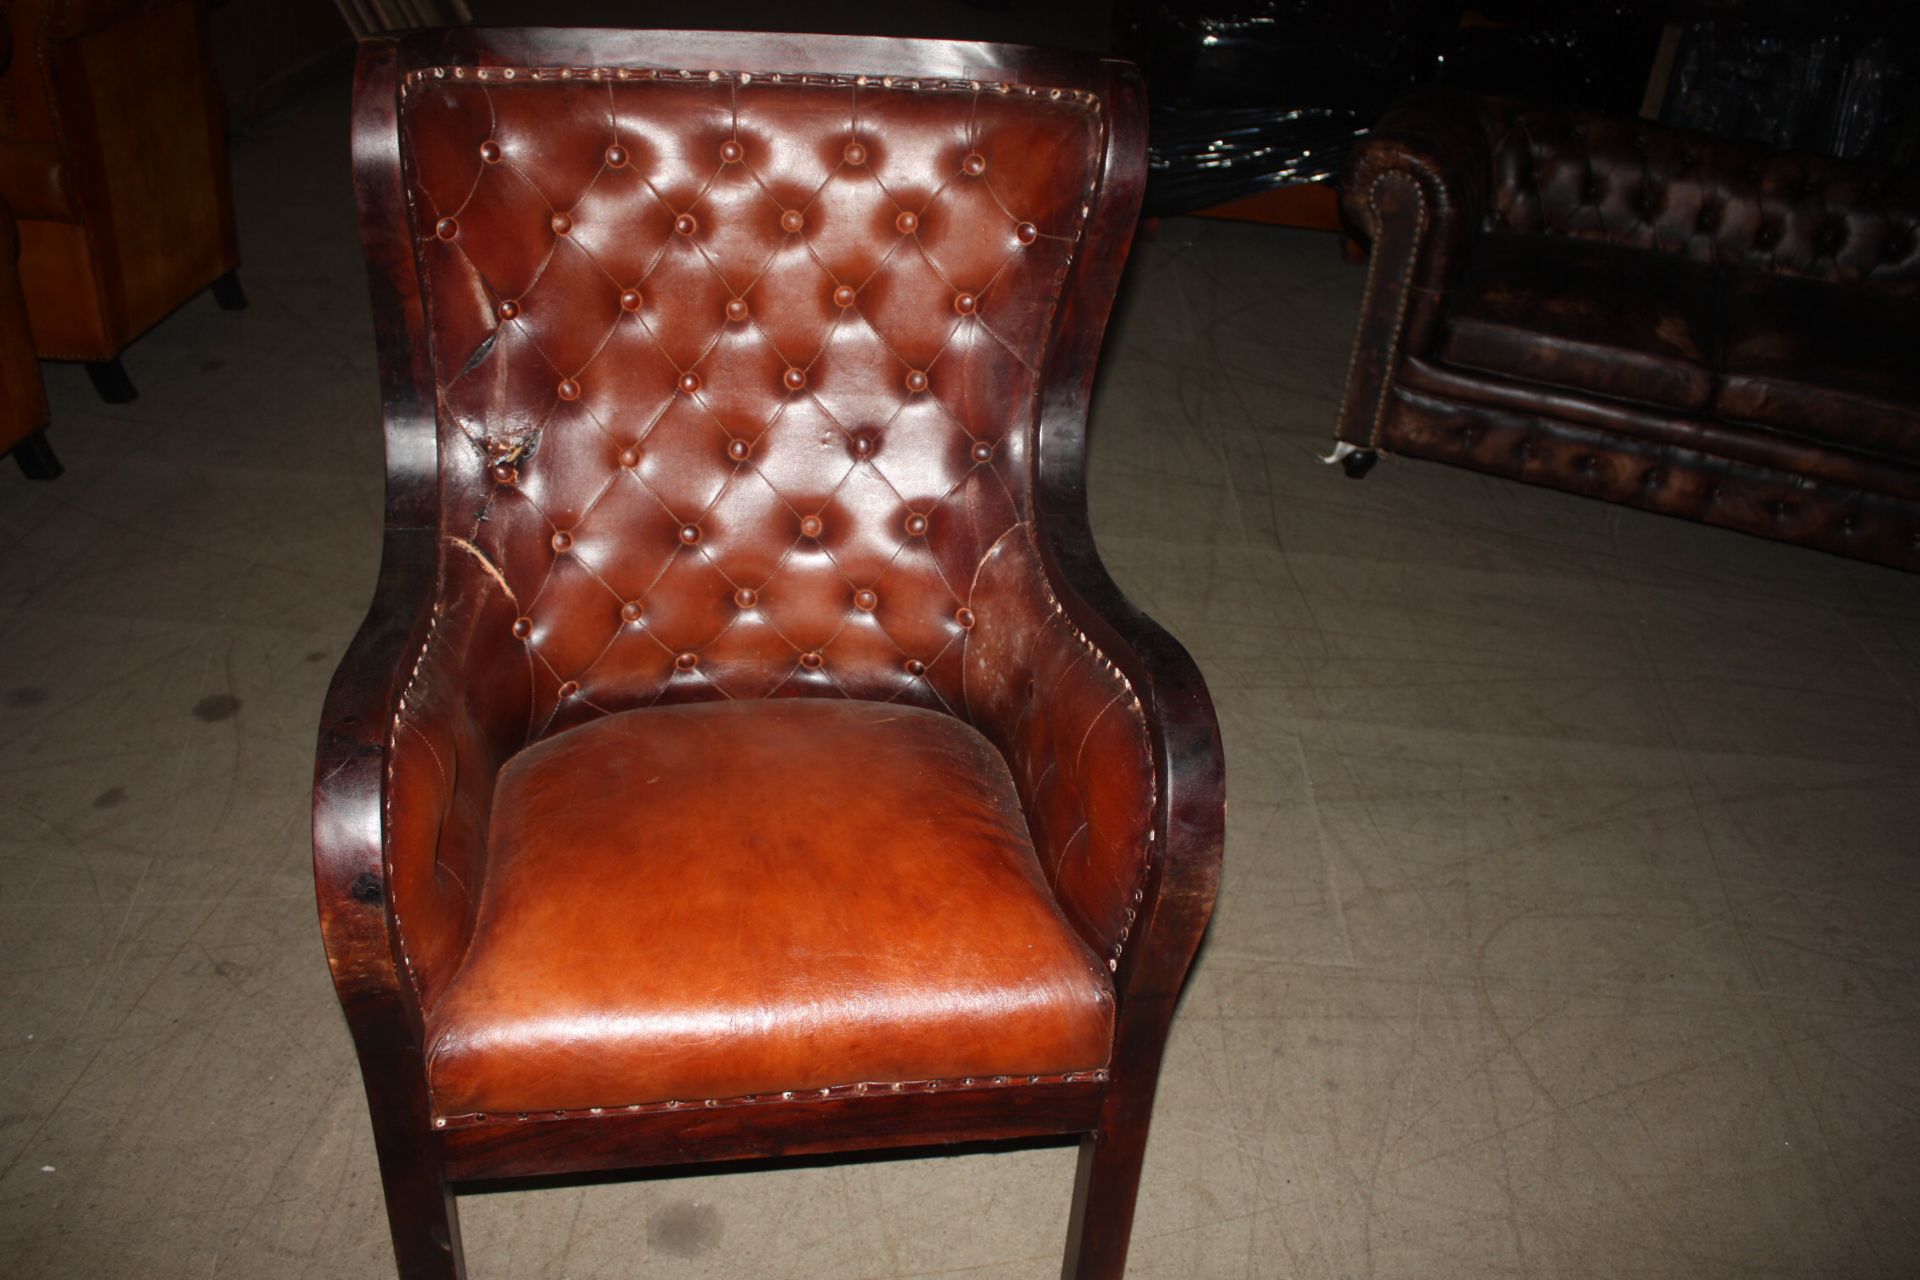 Caff Curve Leather & Wood Armchair In Brown - Image 3 of 5